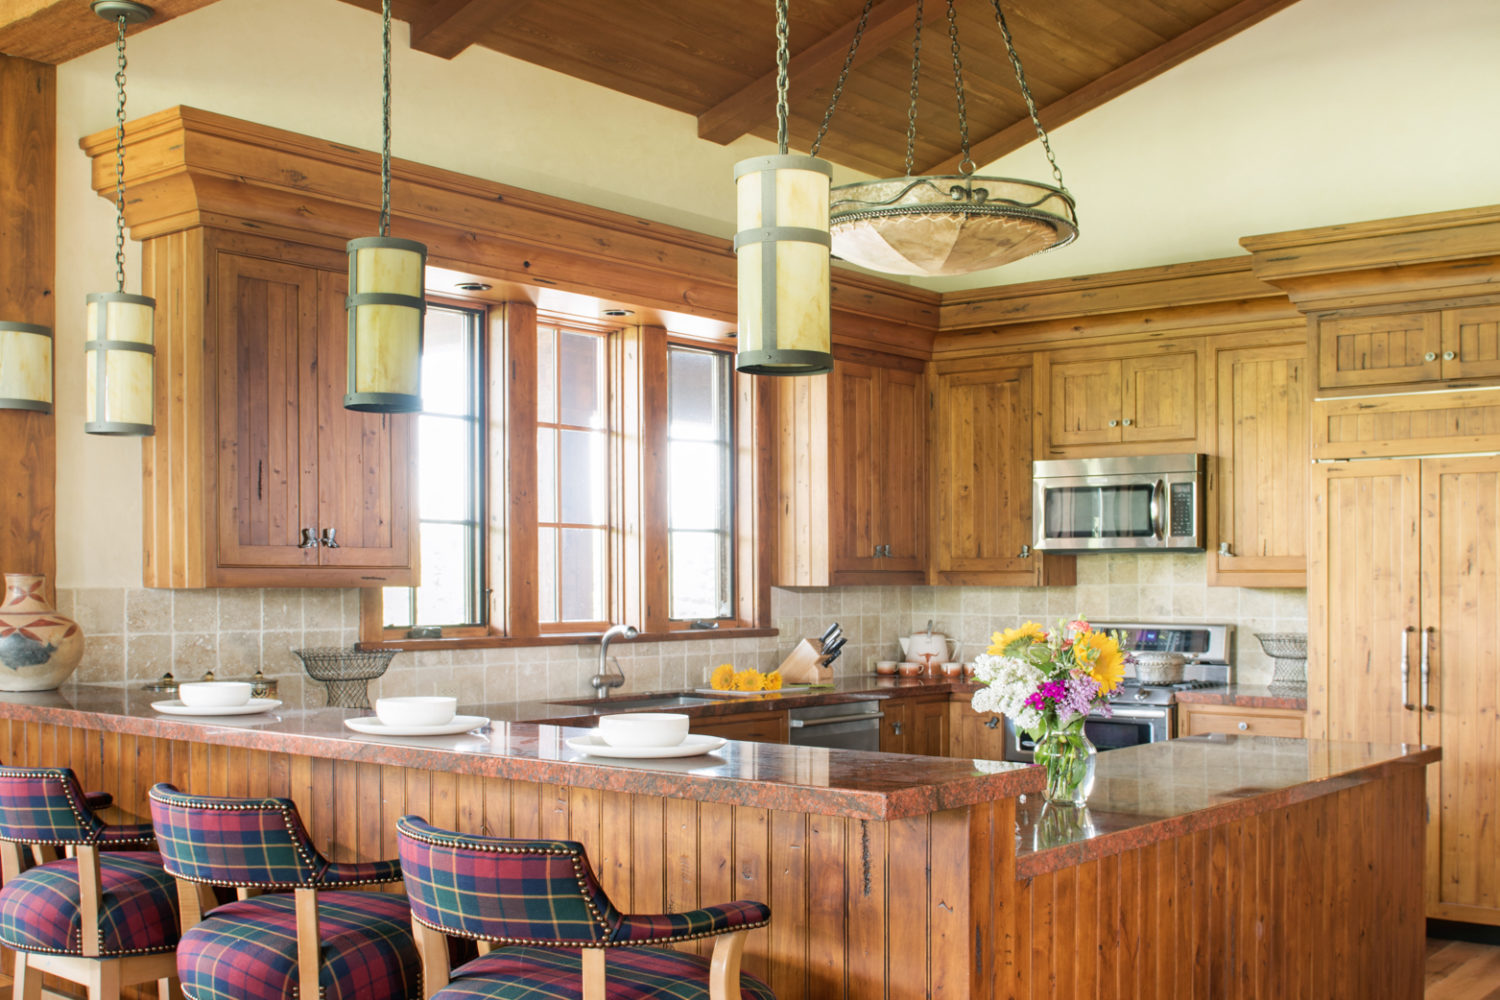 A spacious kitchen with a wraparound counter and barstools